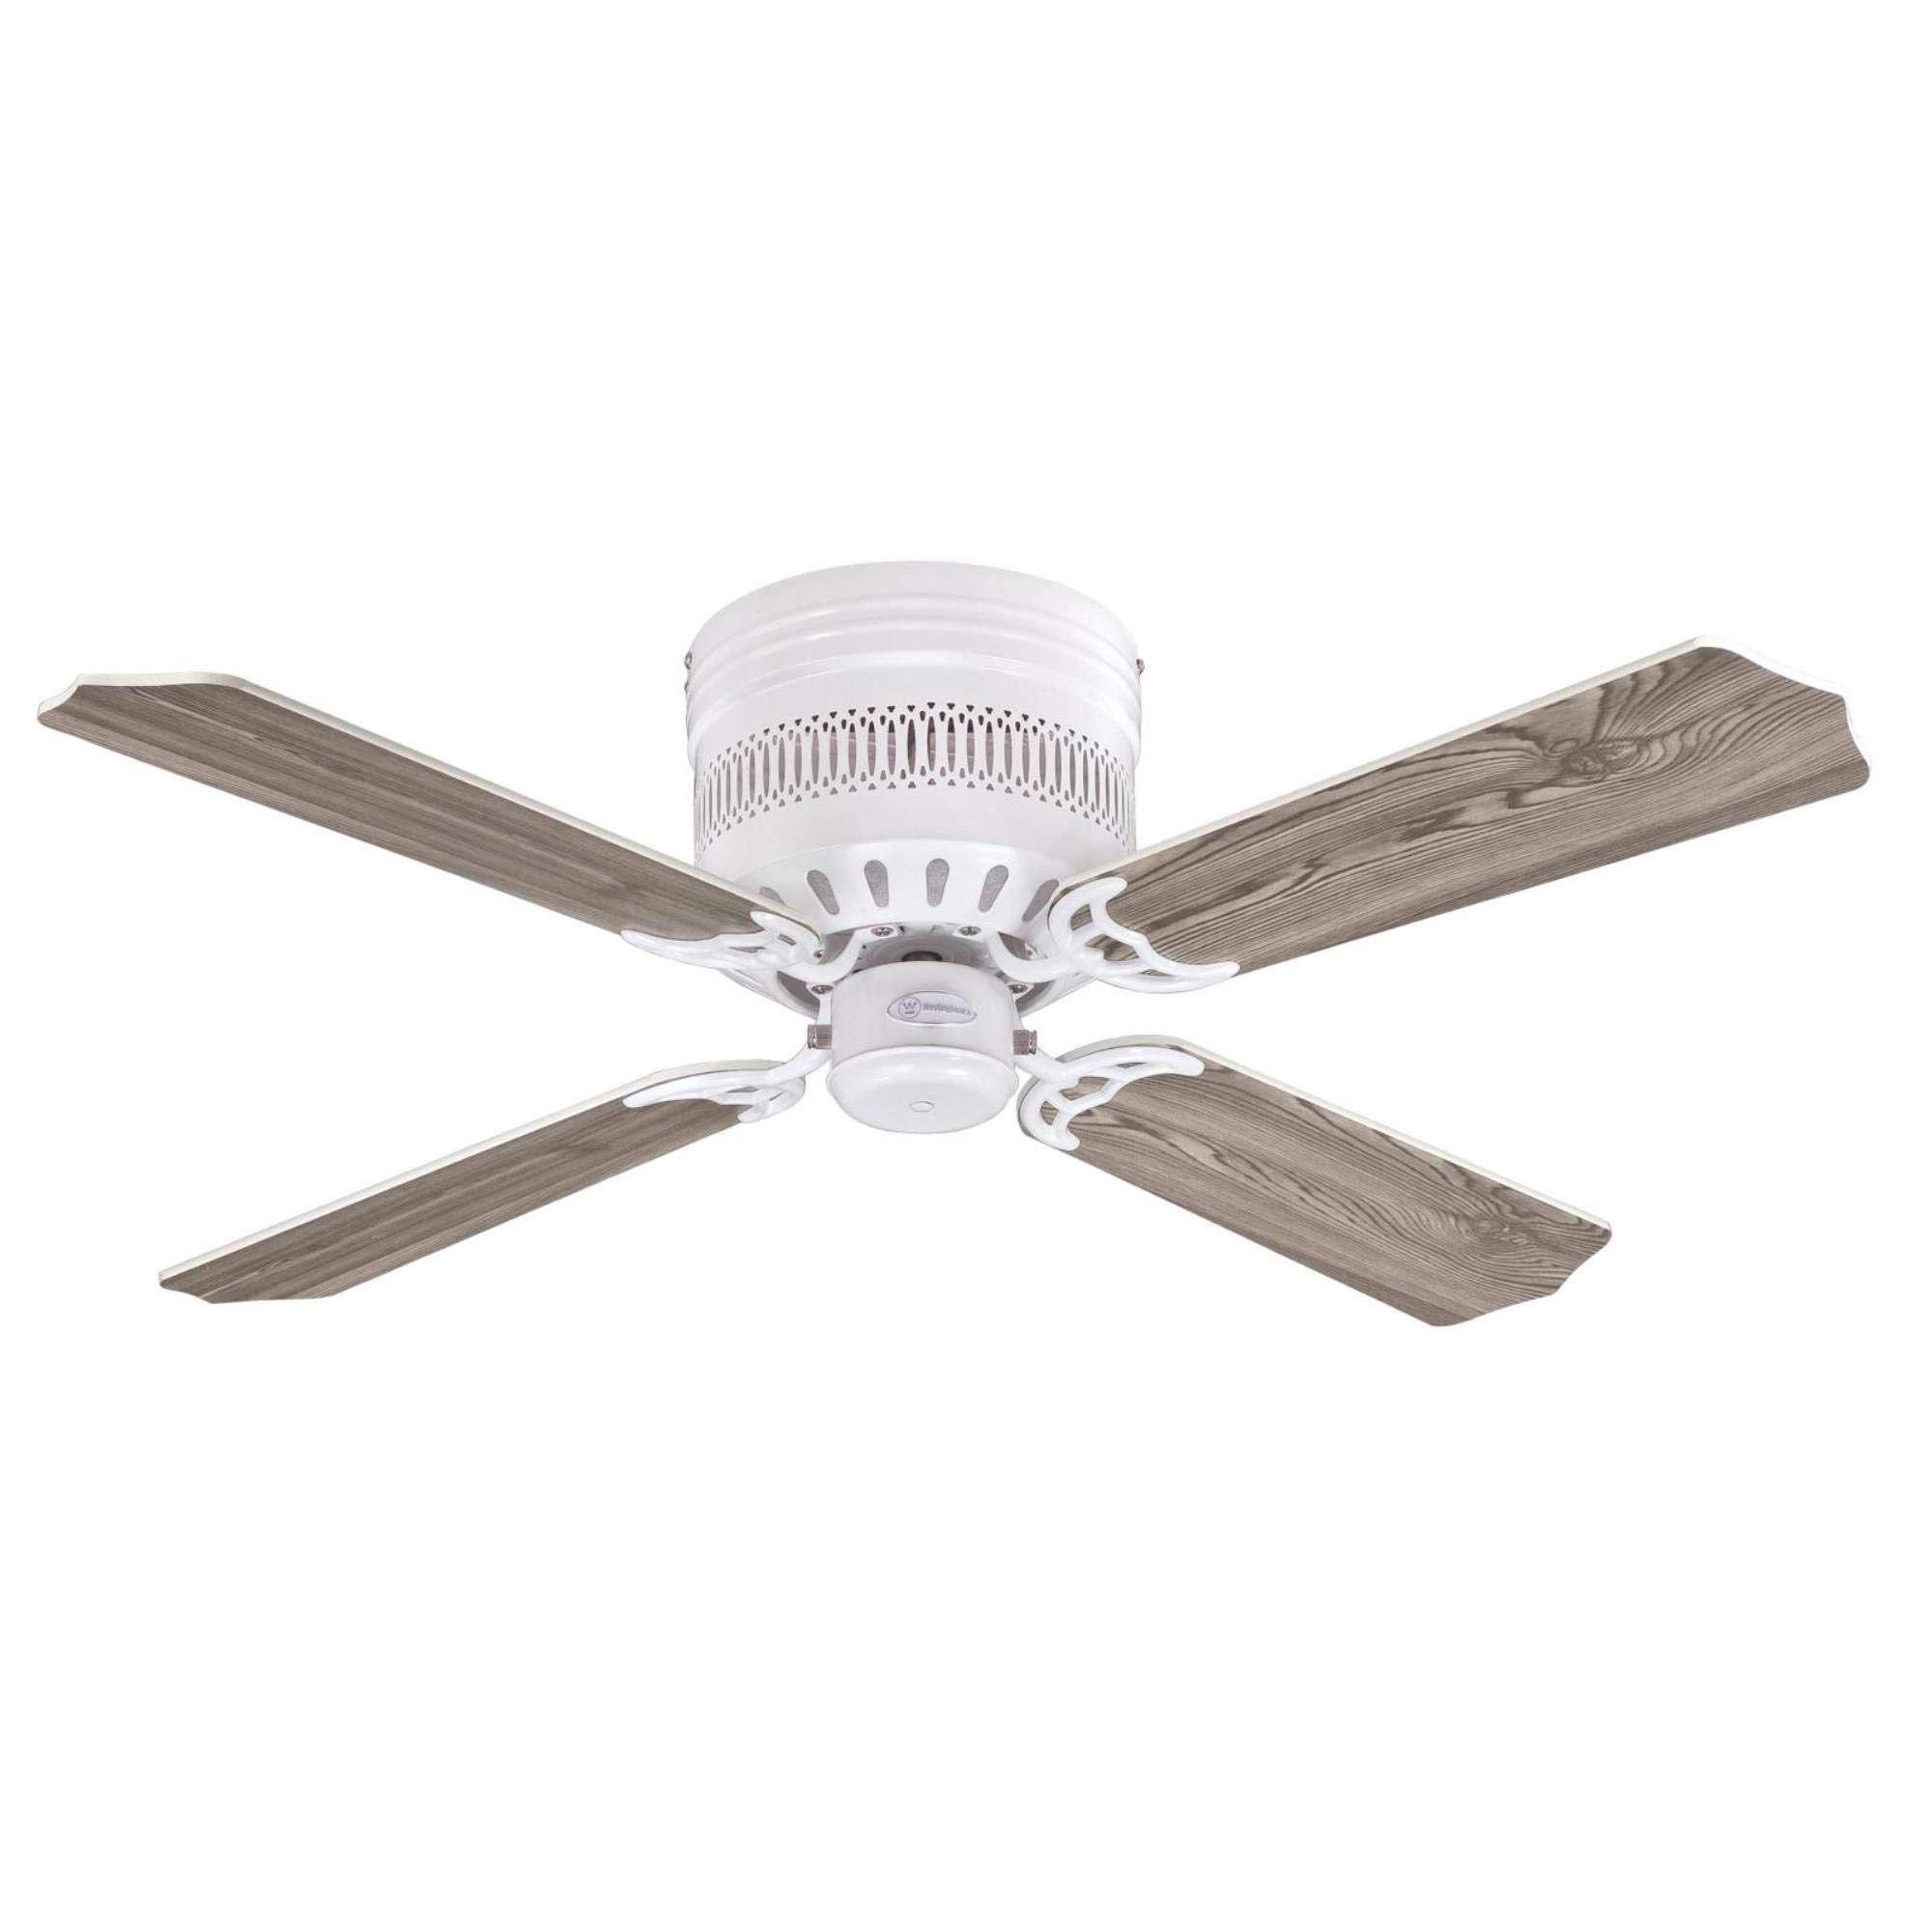 Westinghouse Lighting 7231200 Casanova Supreme Indoor Ceiling Fan with Light, 42 Inch, White